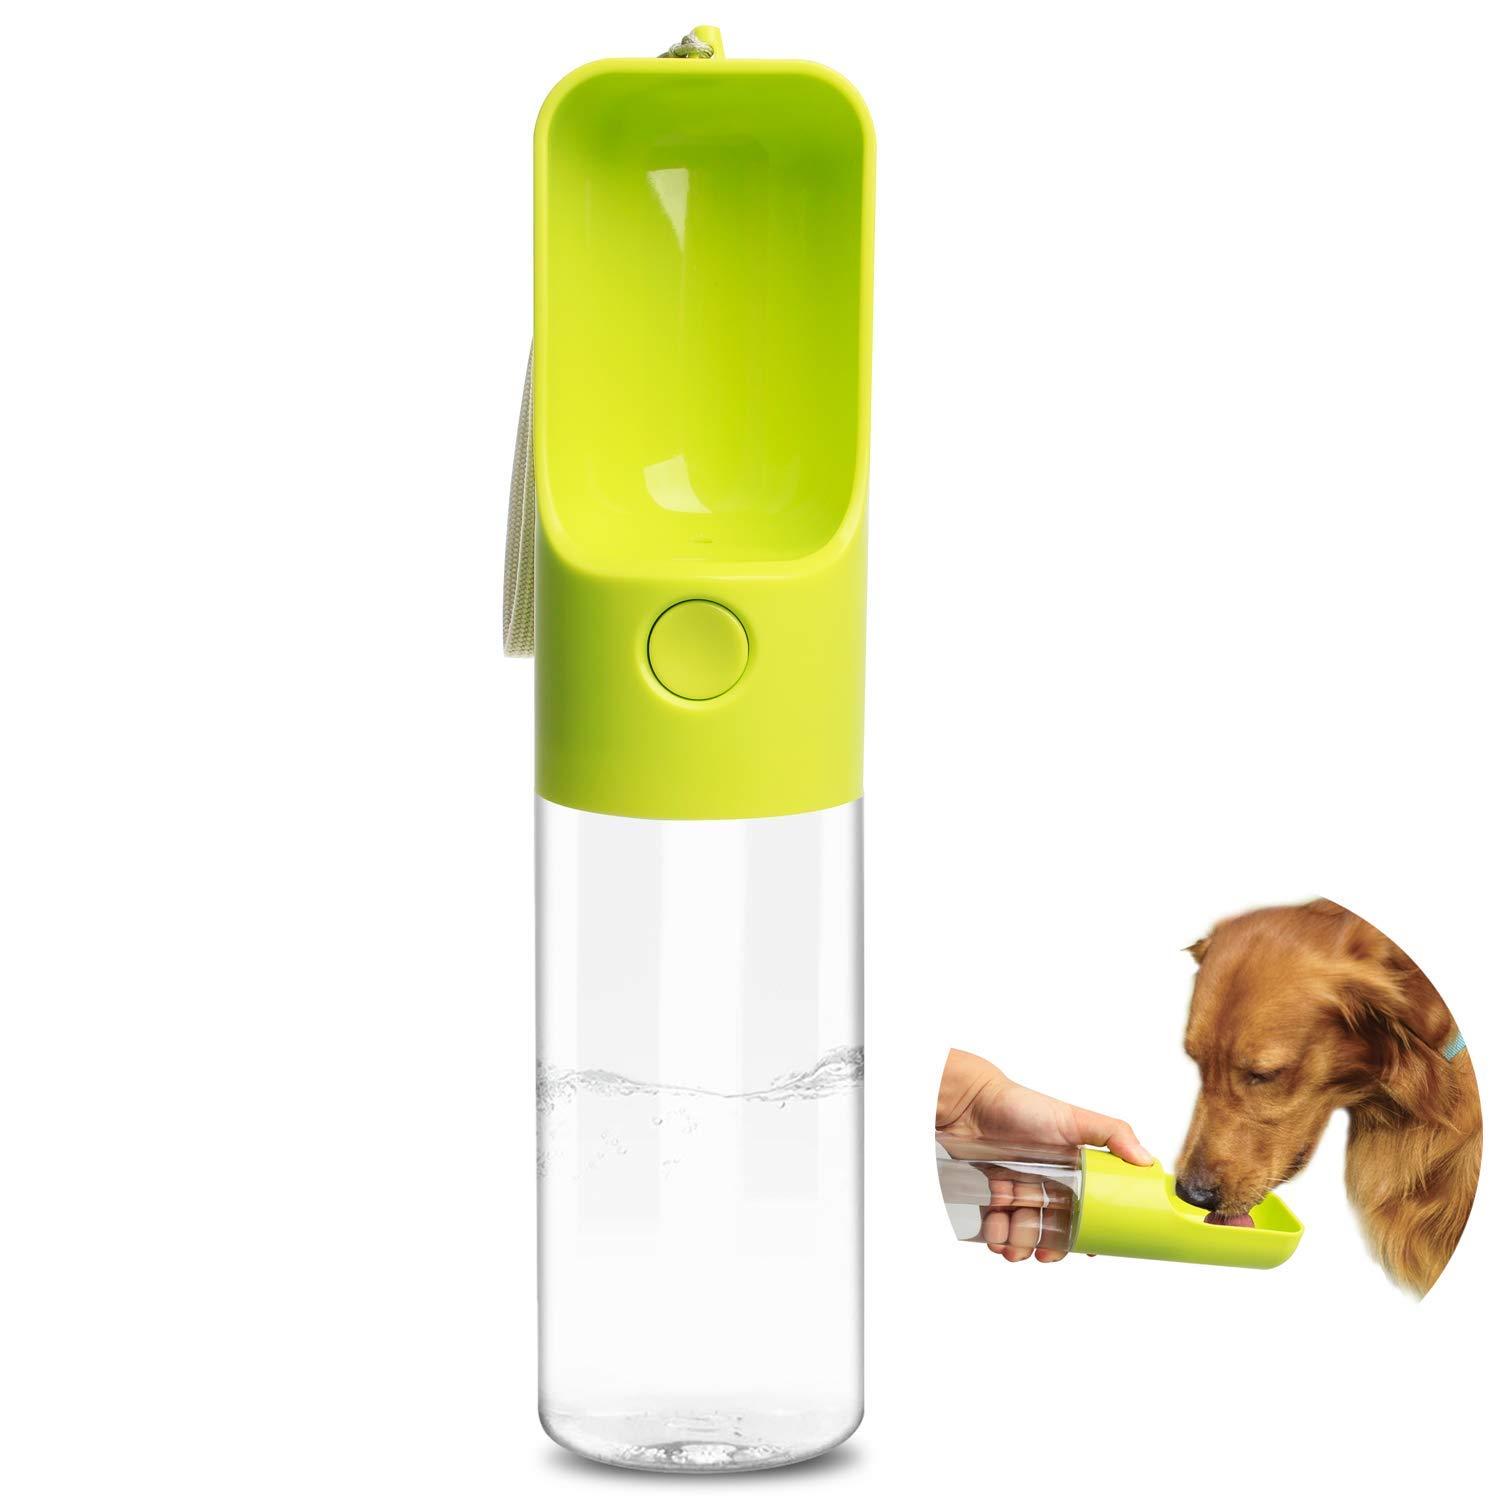 Hestarpet Dog Water Bottle for Walking, Leak Proof Portable Water Bottle with Bowl Dispenser, Pets Outdoor Drinking Water Bottle for Travelling, Hiking or Camping